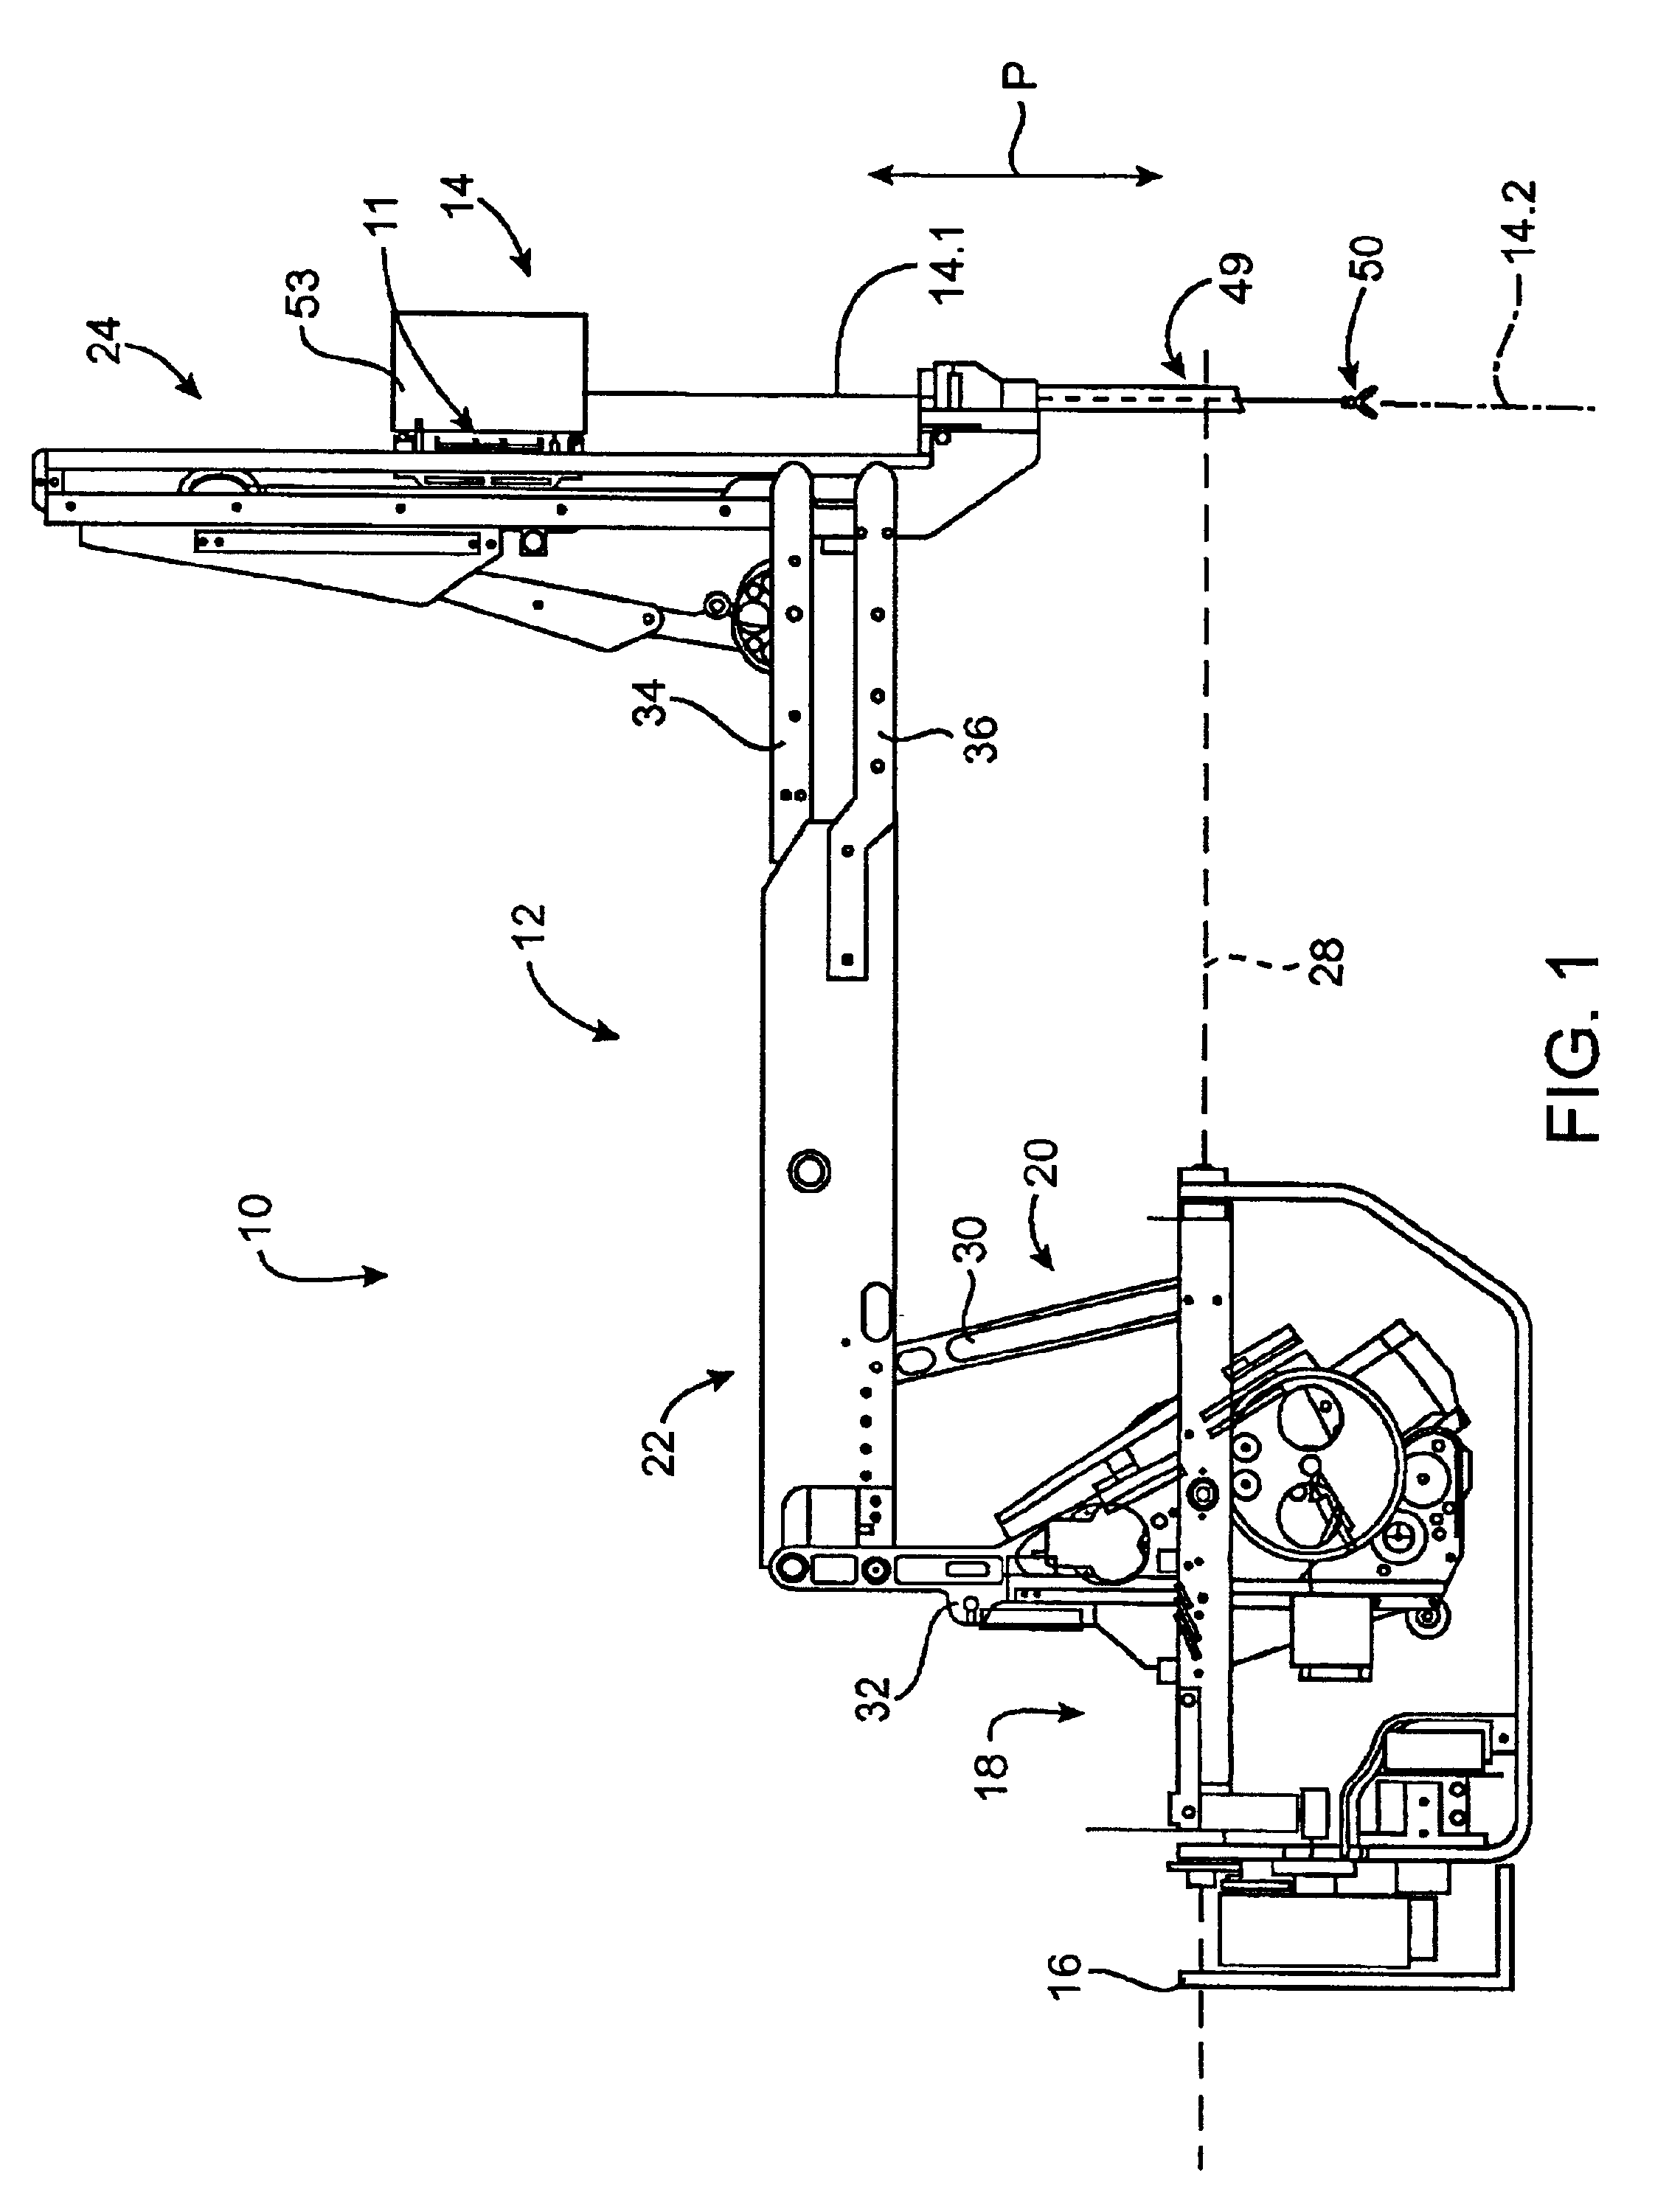 Surgical tools for use in minimally invasive telesurgical applications